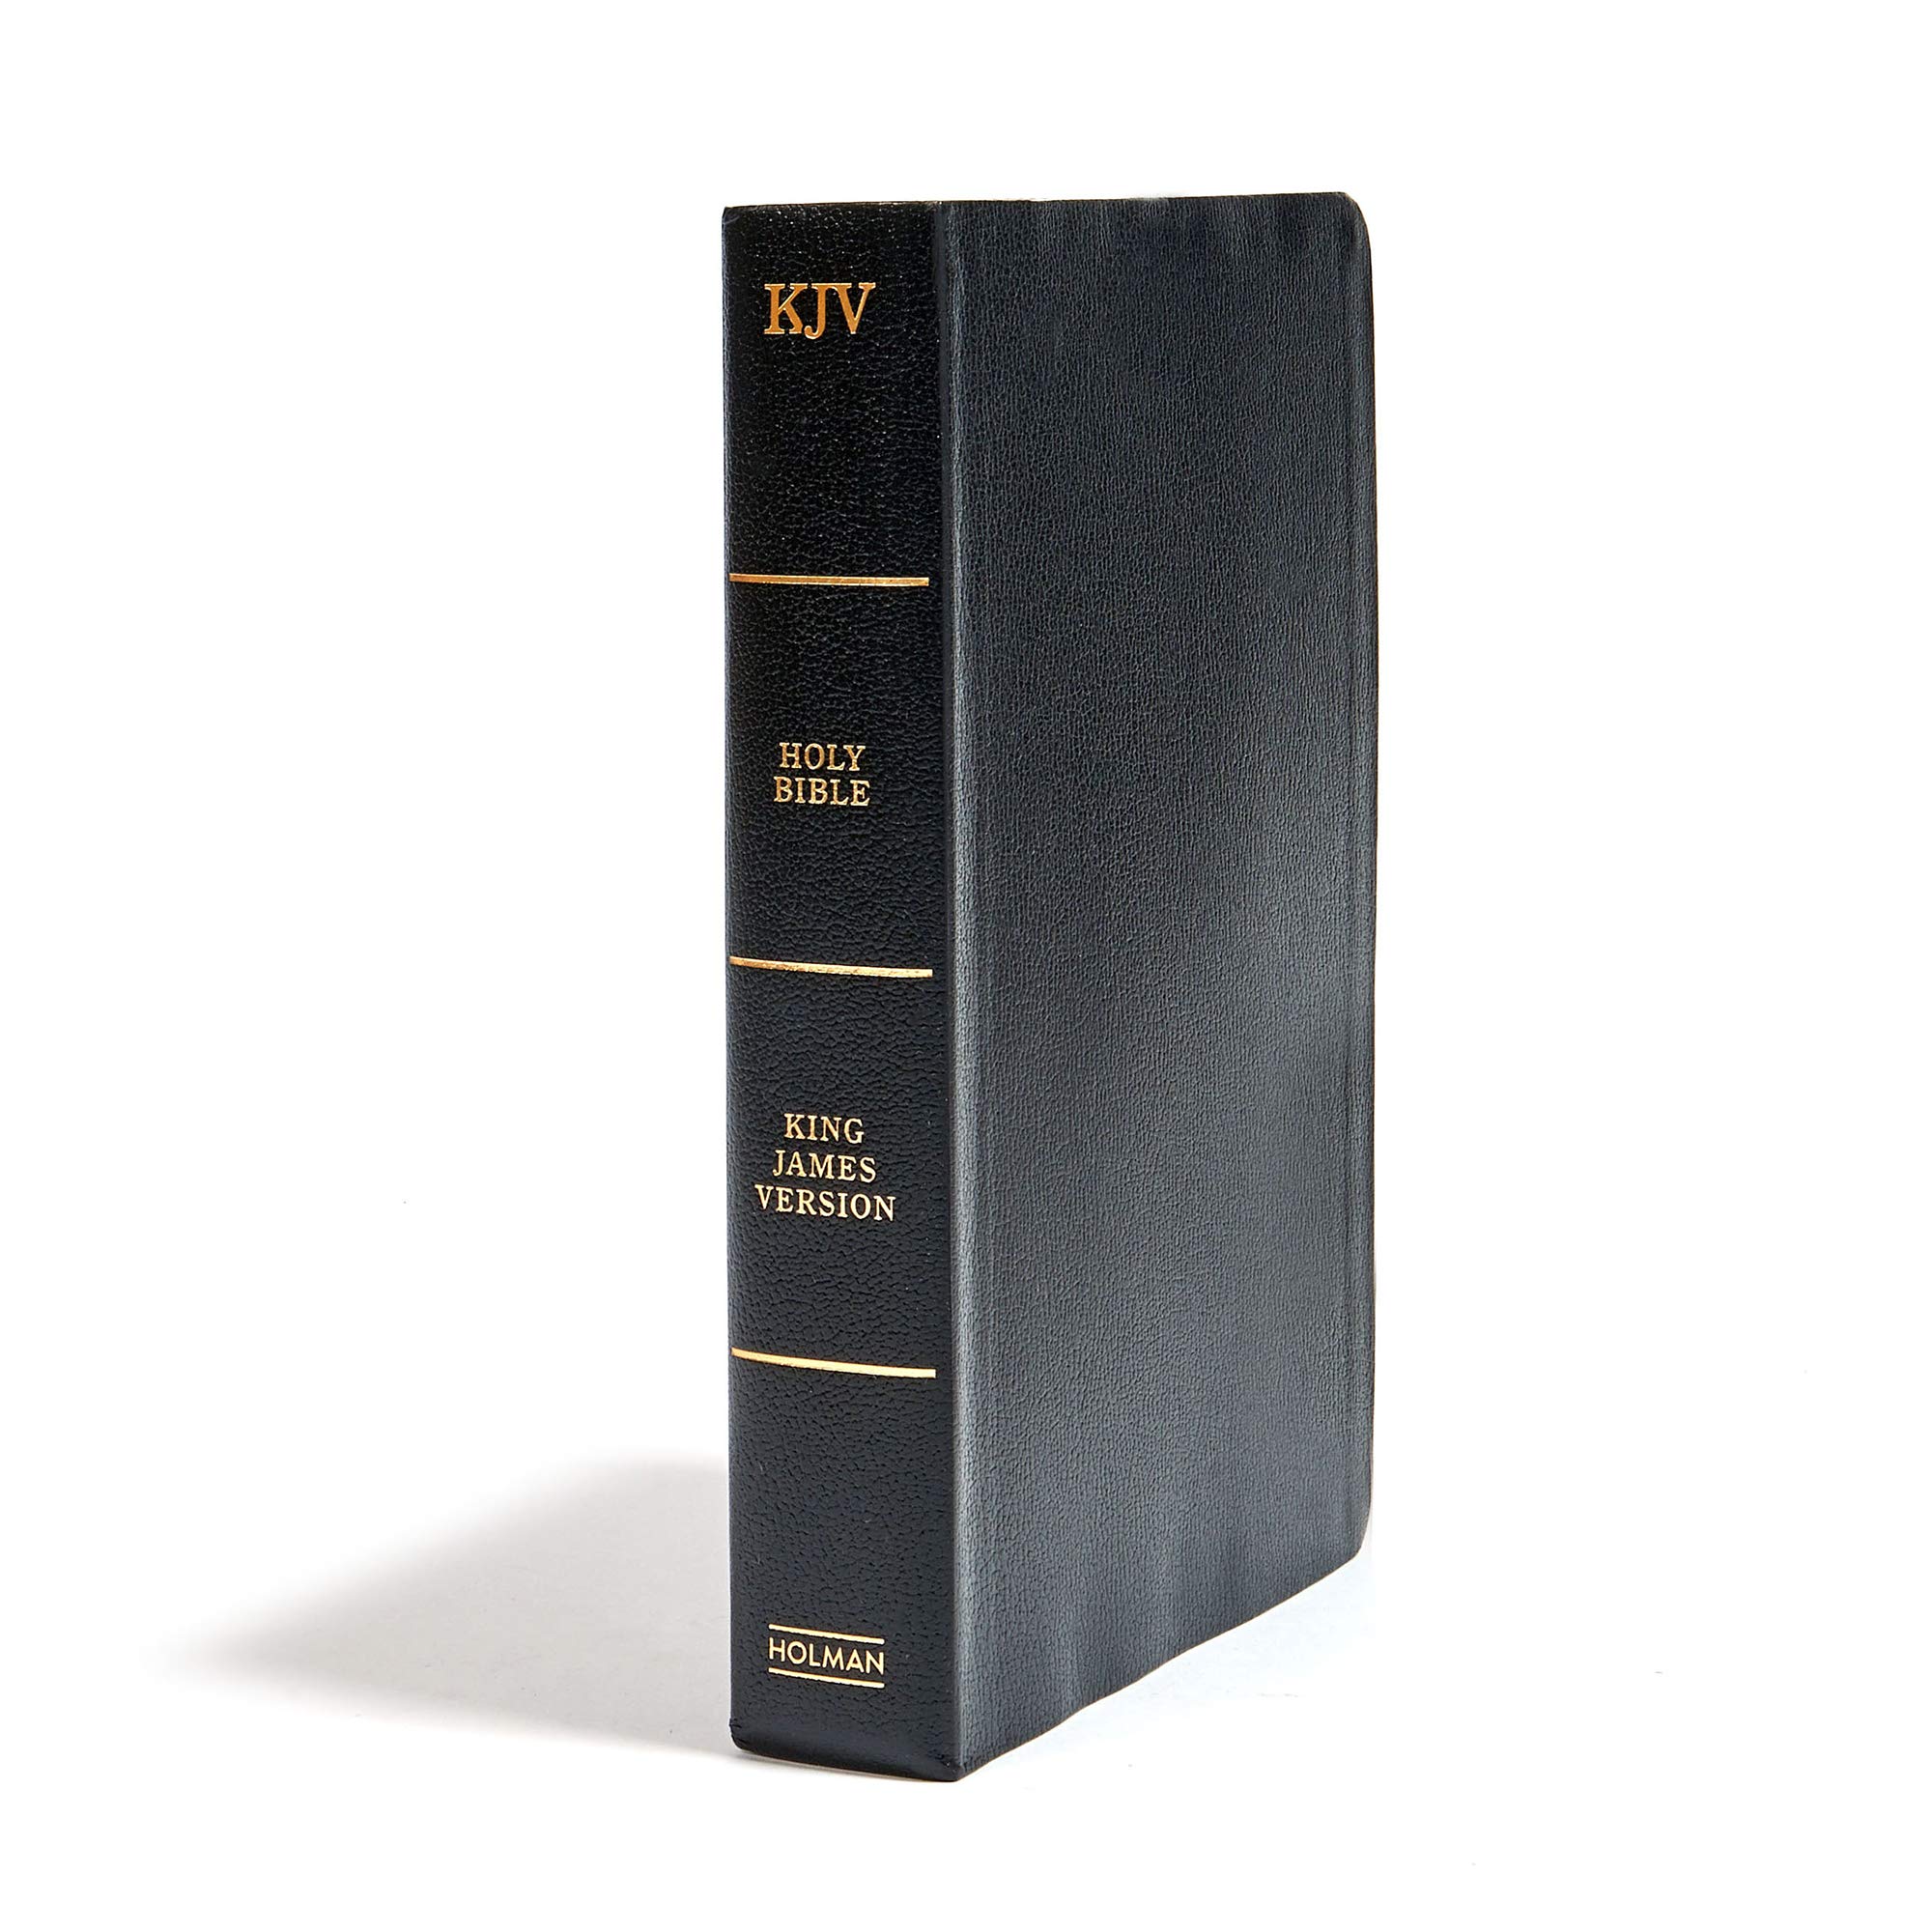 KJV Super Giant Print Reference Bible, Black Imitation Leather, Red Letter, Pure Cambridge Text, Presentation Page, Cross-References, Full-Color Maps, Easy-to-Read Bible MCM Type